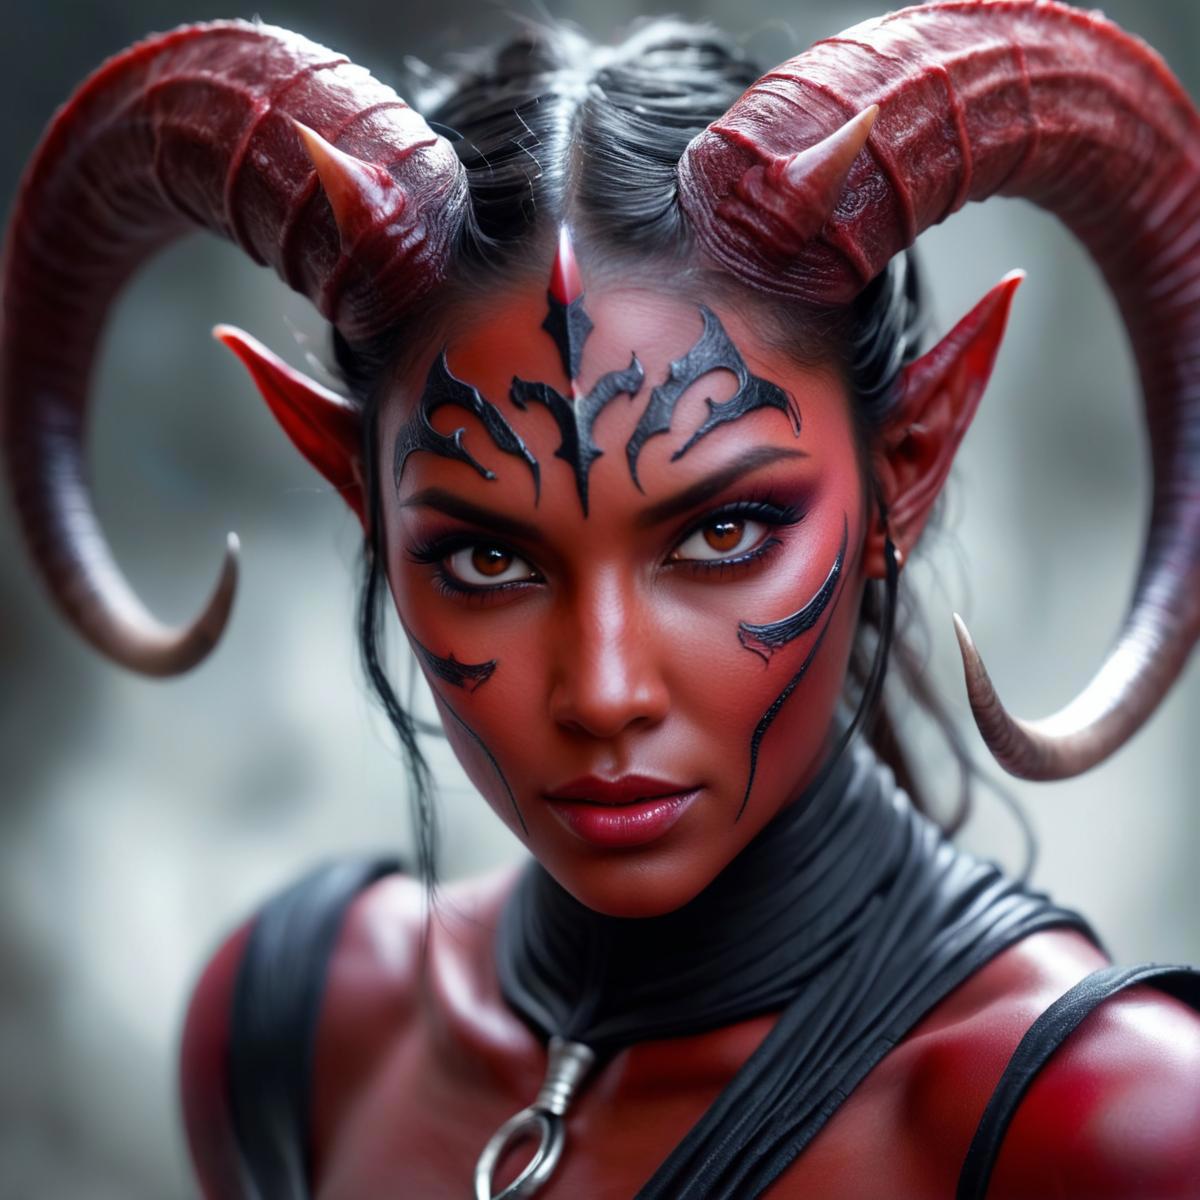 A woman with red paint on her face and horns on her head, wearing a black top.